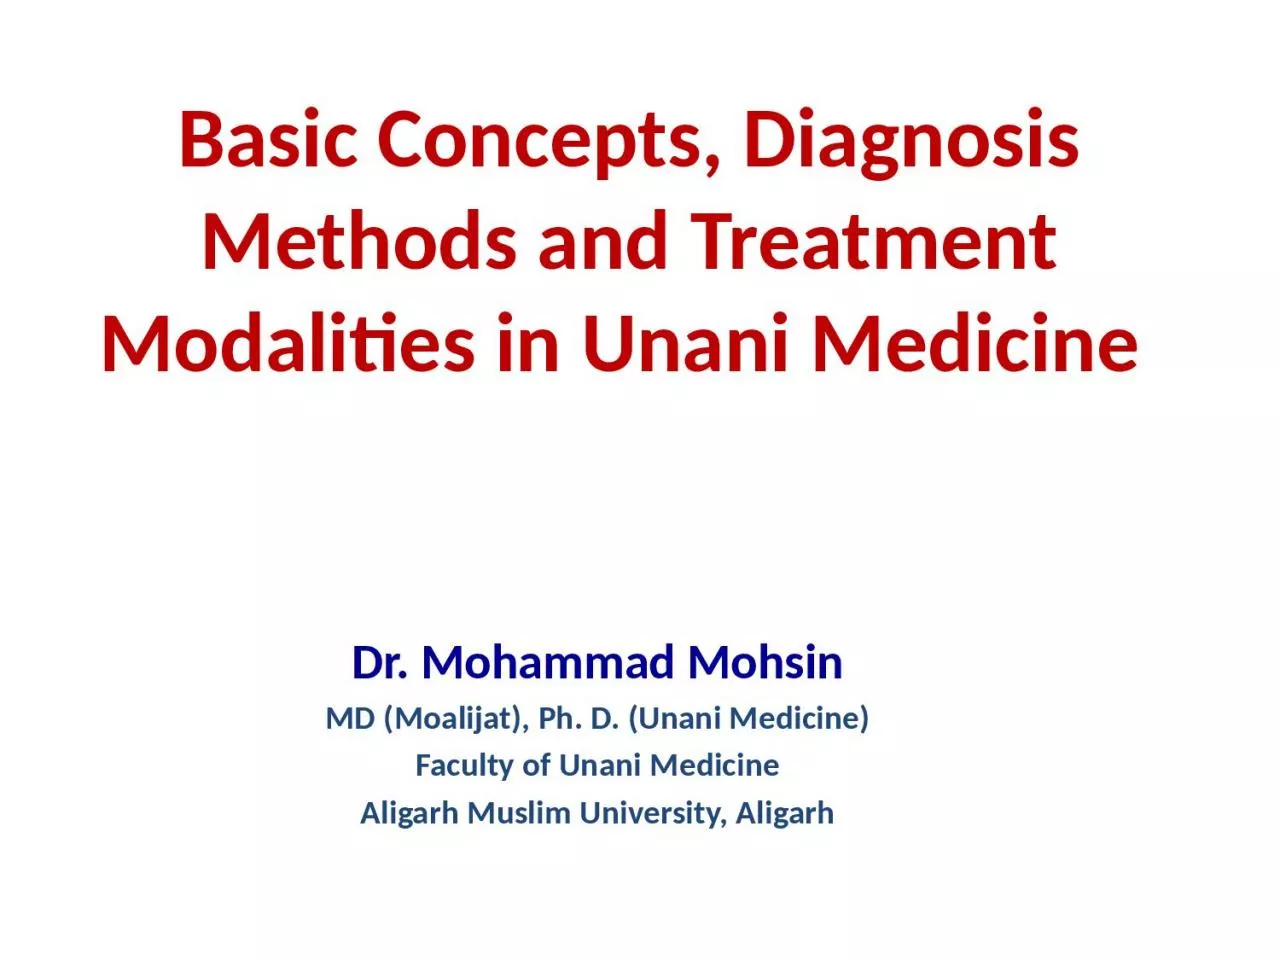 Basic Concepts, Diagnosis Methods and Treatment Modalities in Unani Medicine